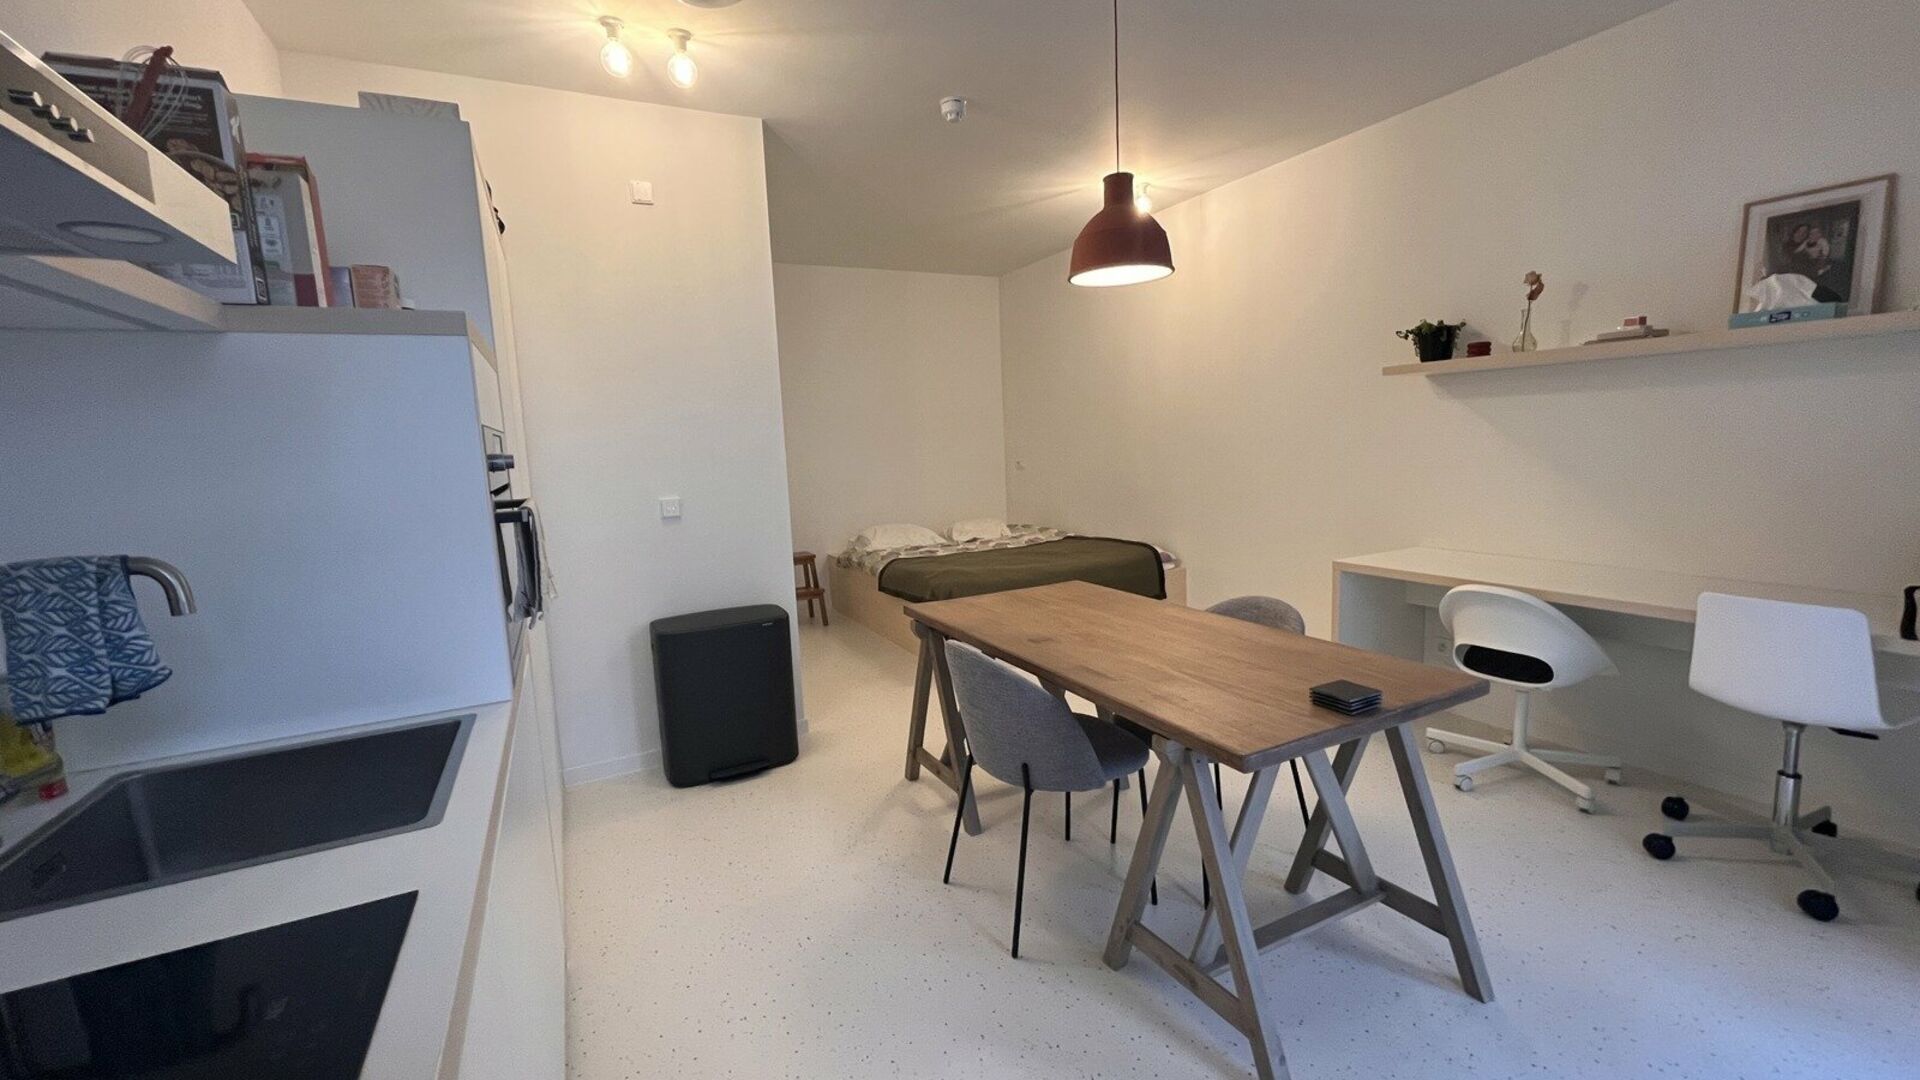 Residence YOU, in the middle on Bondgenoten Avenue, is the new hot spot for students. This cozy studio is located in the back on the garden level and measures 28 m². The studio includes a desk, dining table, fully equipped kitchen, built-in closet, doubl